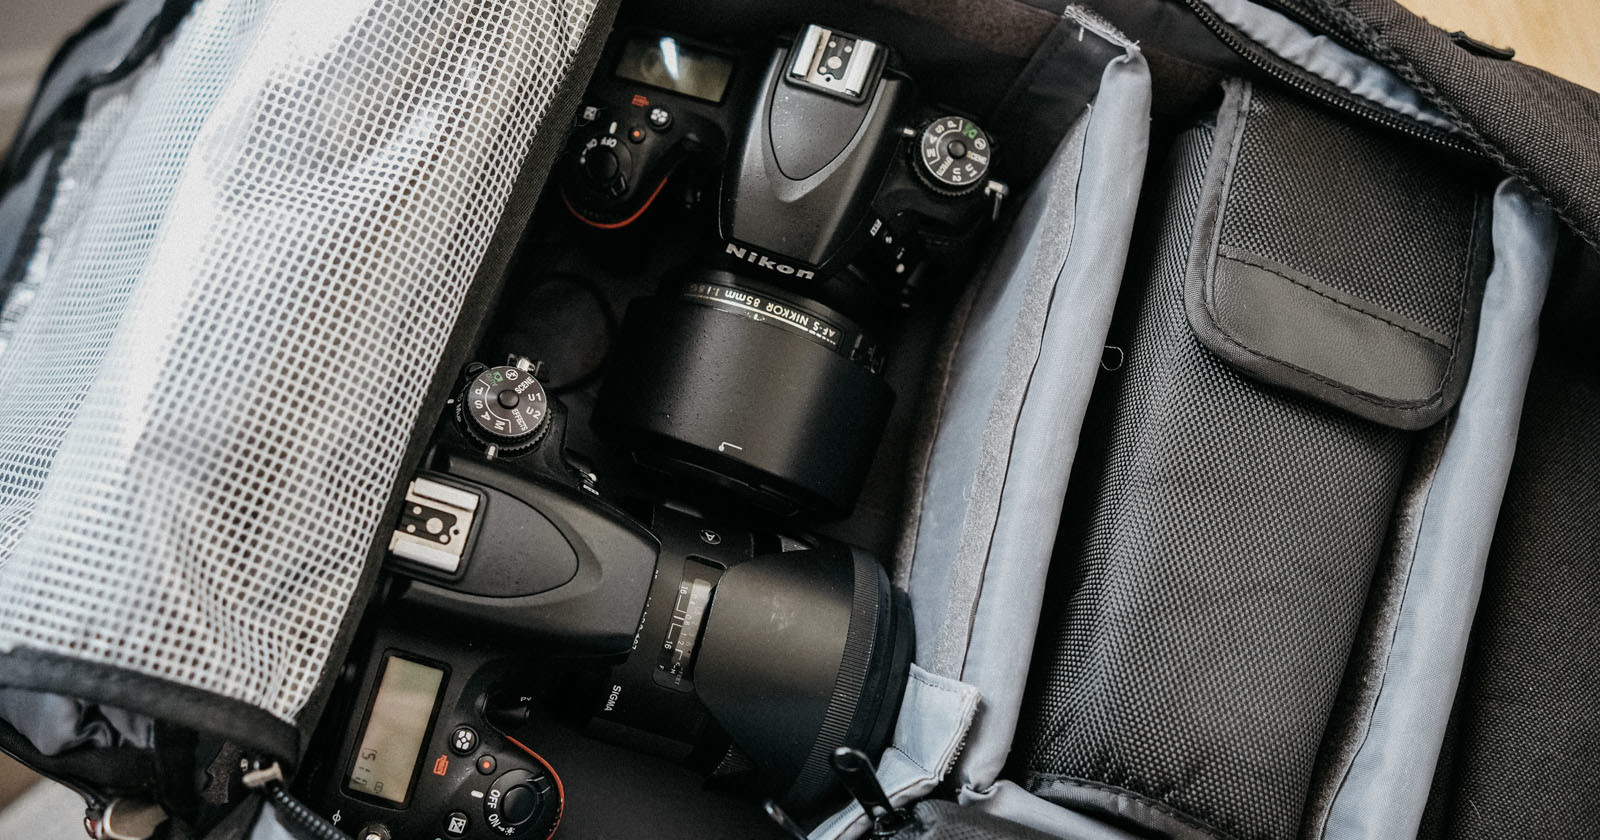 Whats In Your Camera Bag, Anete Lusina?